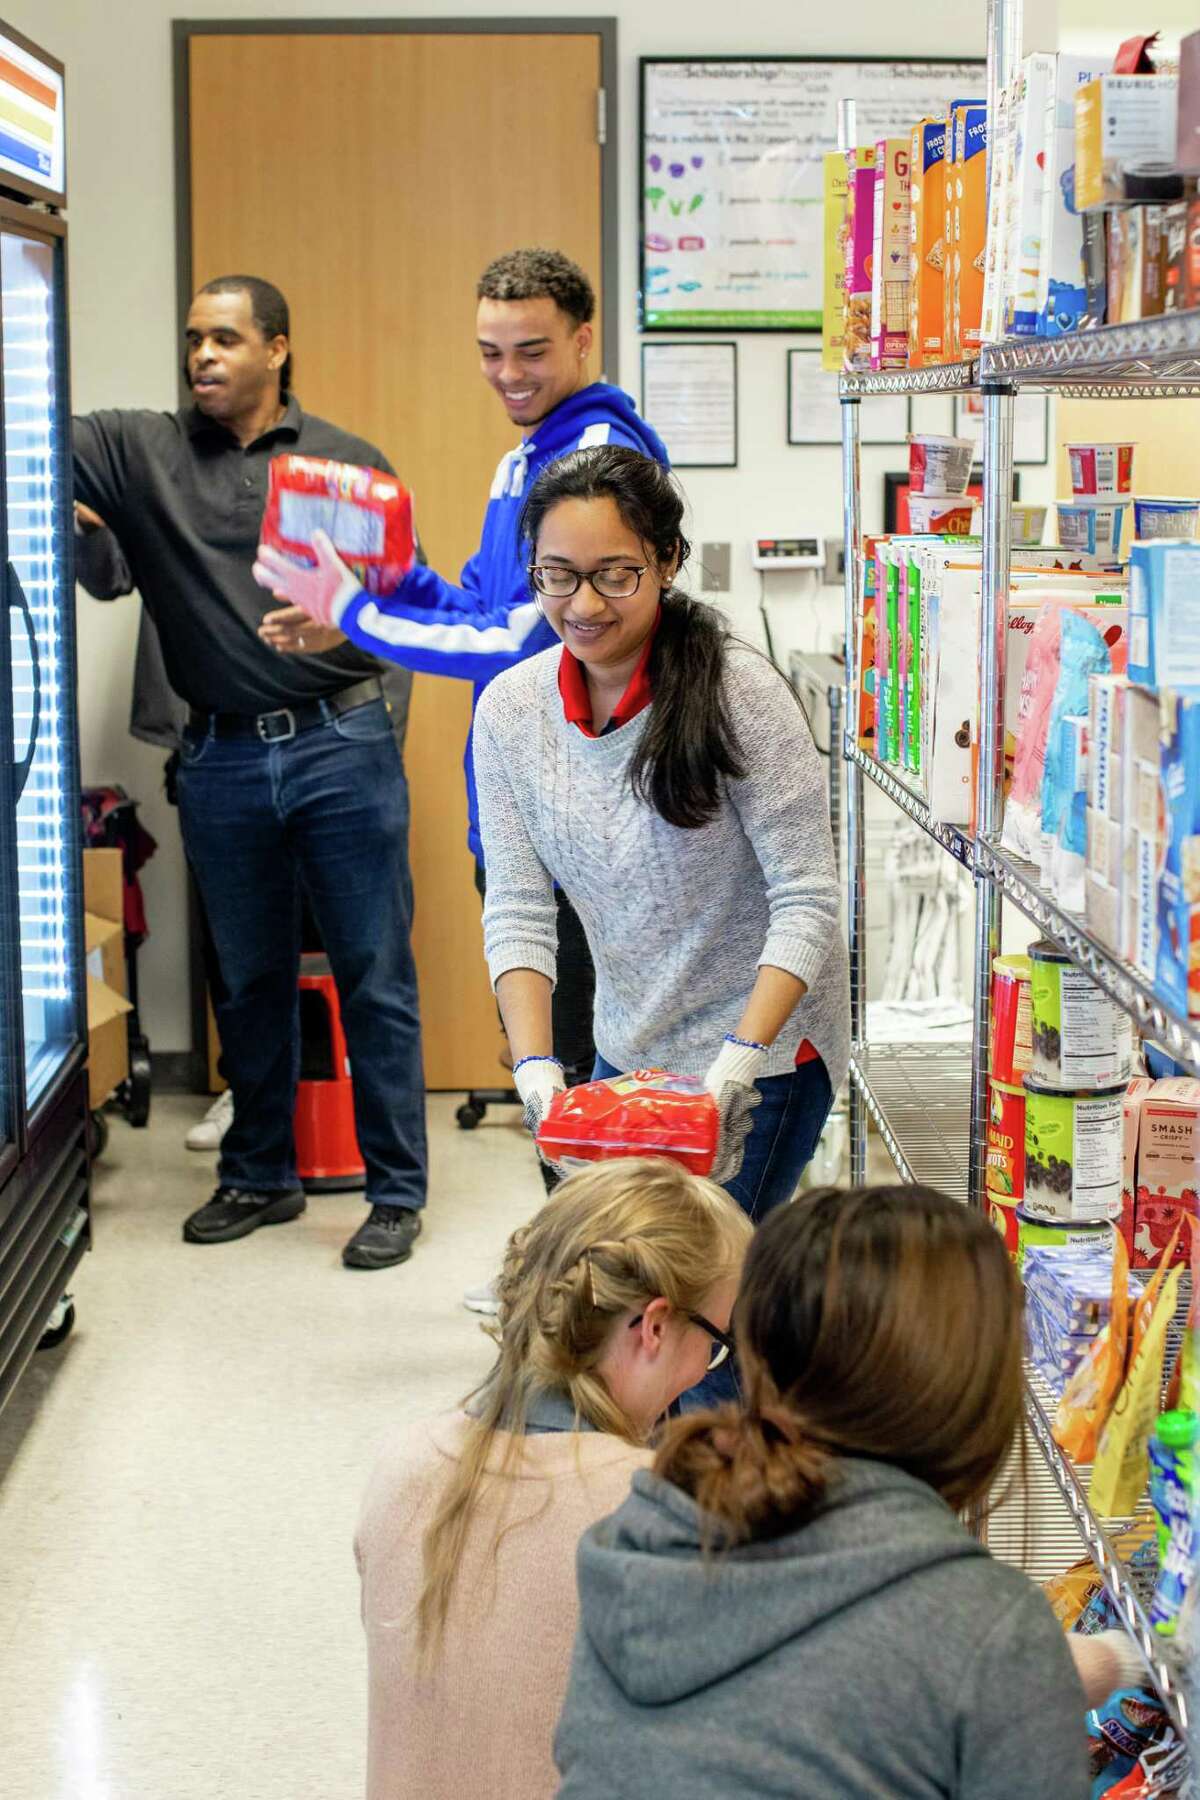 University of Houston has opened a new food market called the "Cougar Cupboard" that will offer all students up to 30 pounds of free groceries a week.